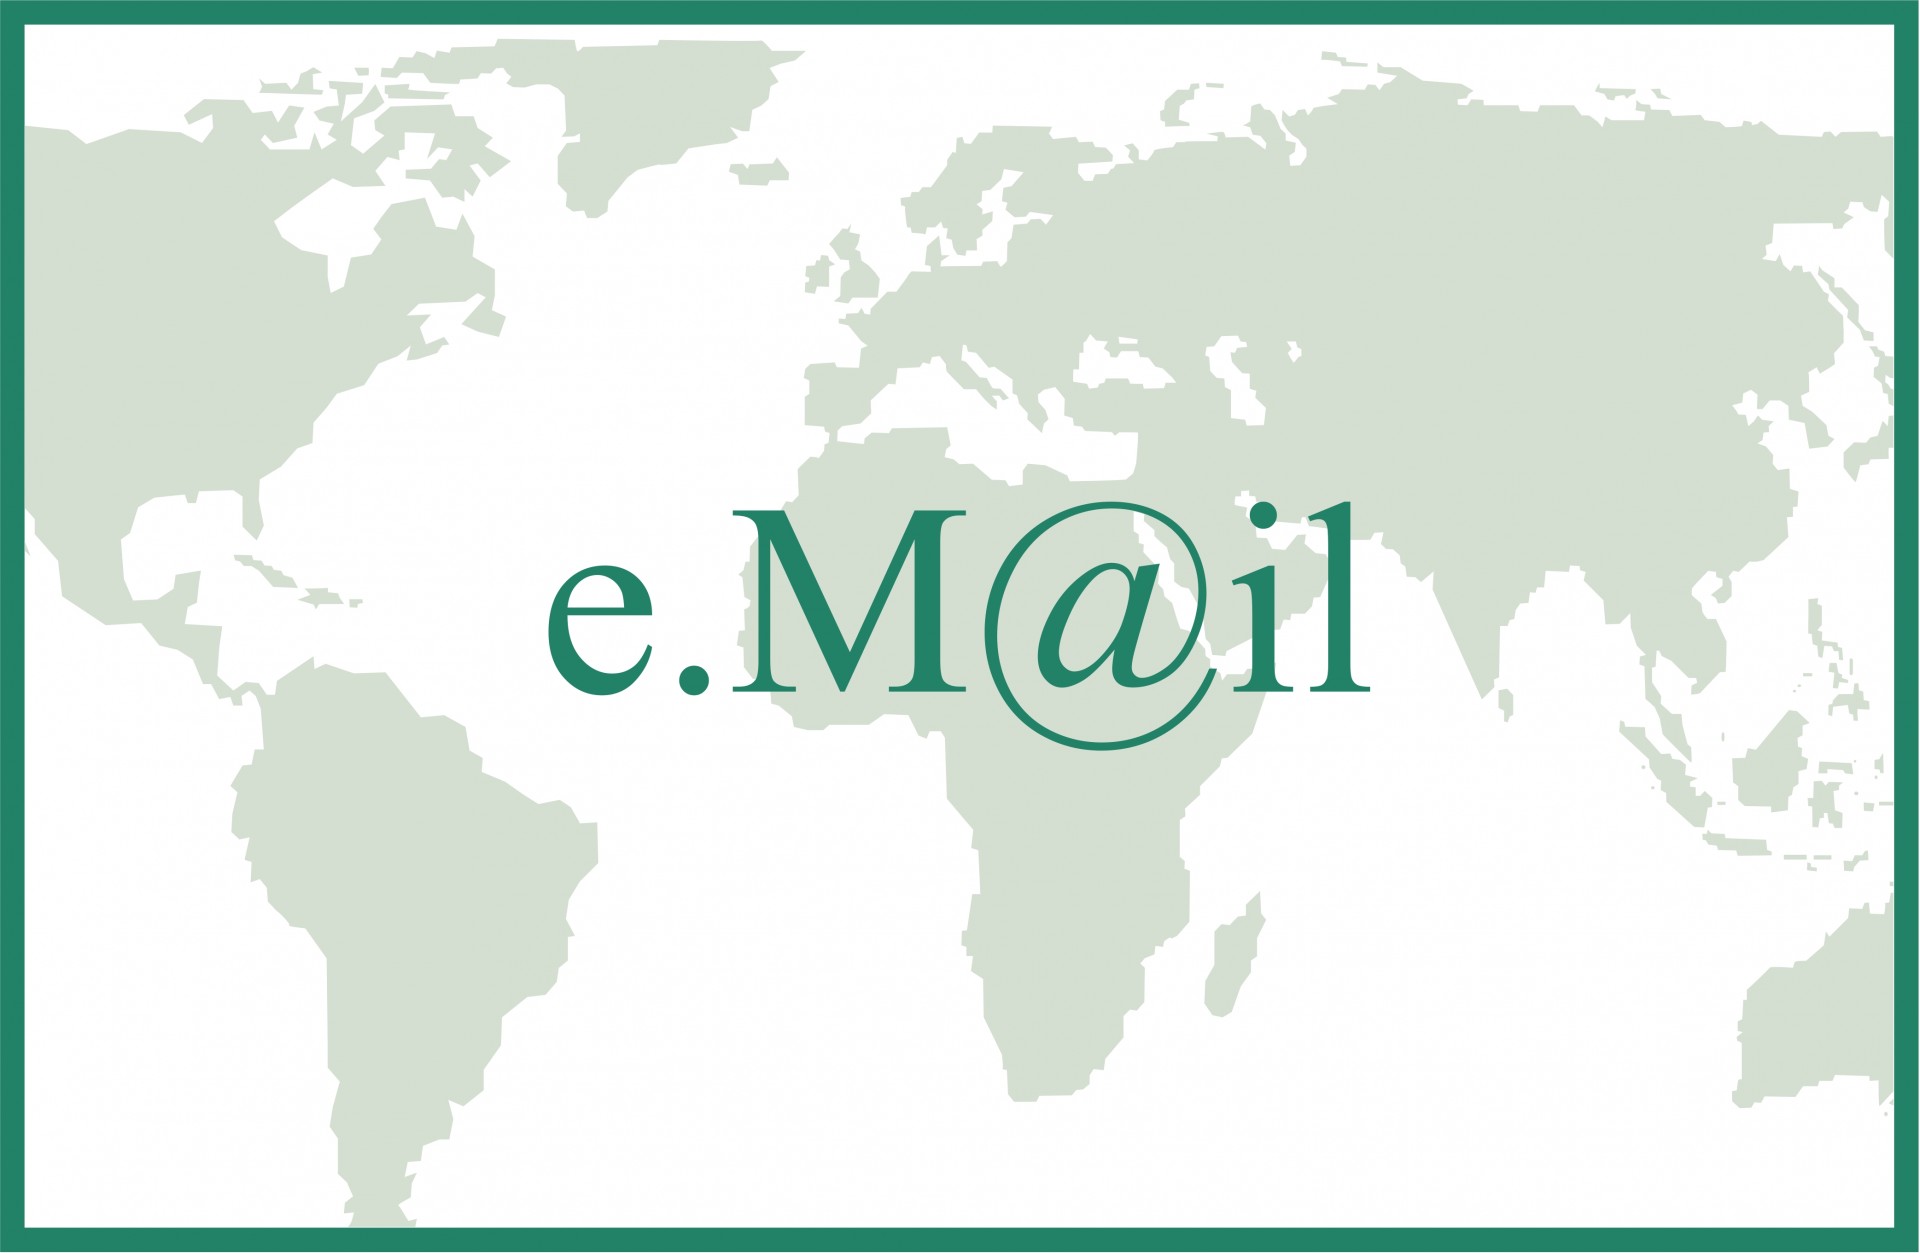 BEST PRACTICES FOR EMAILING CUSTOMERS